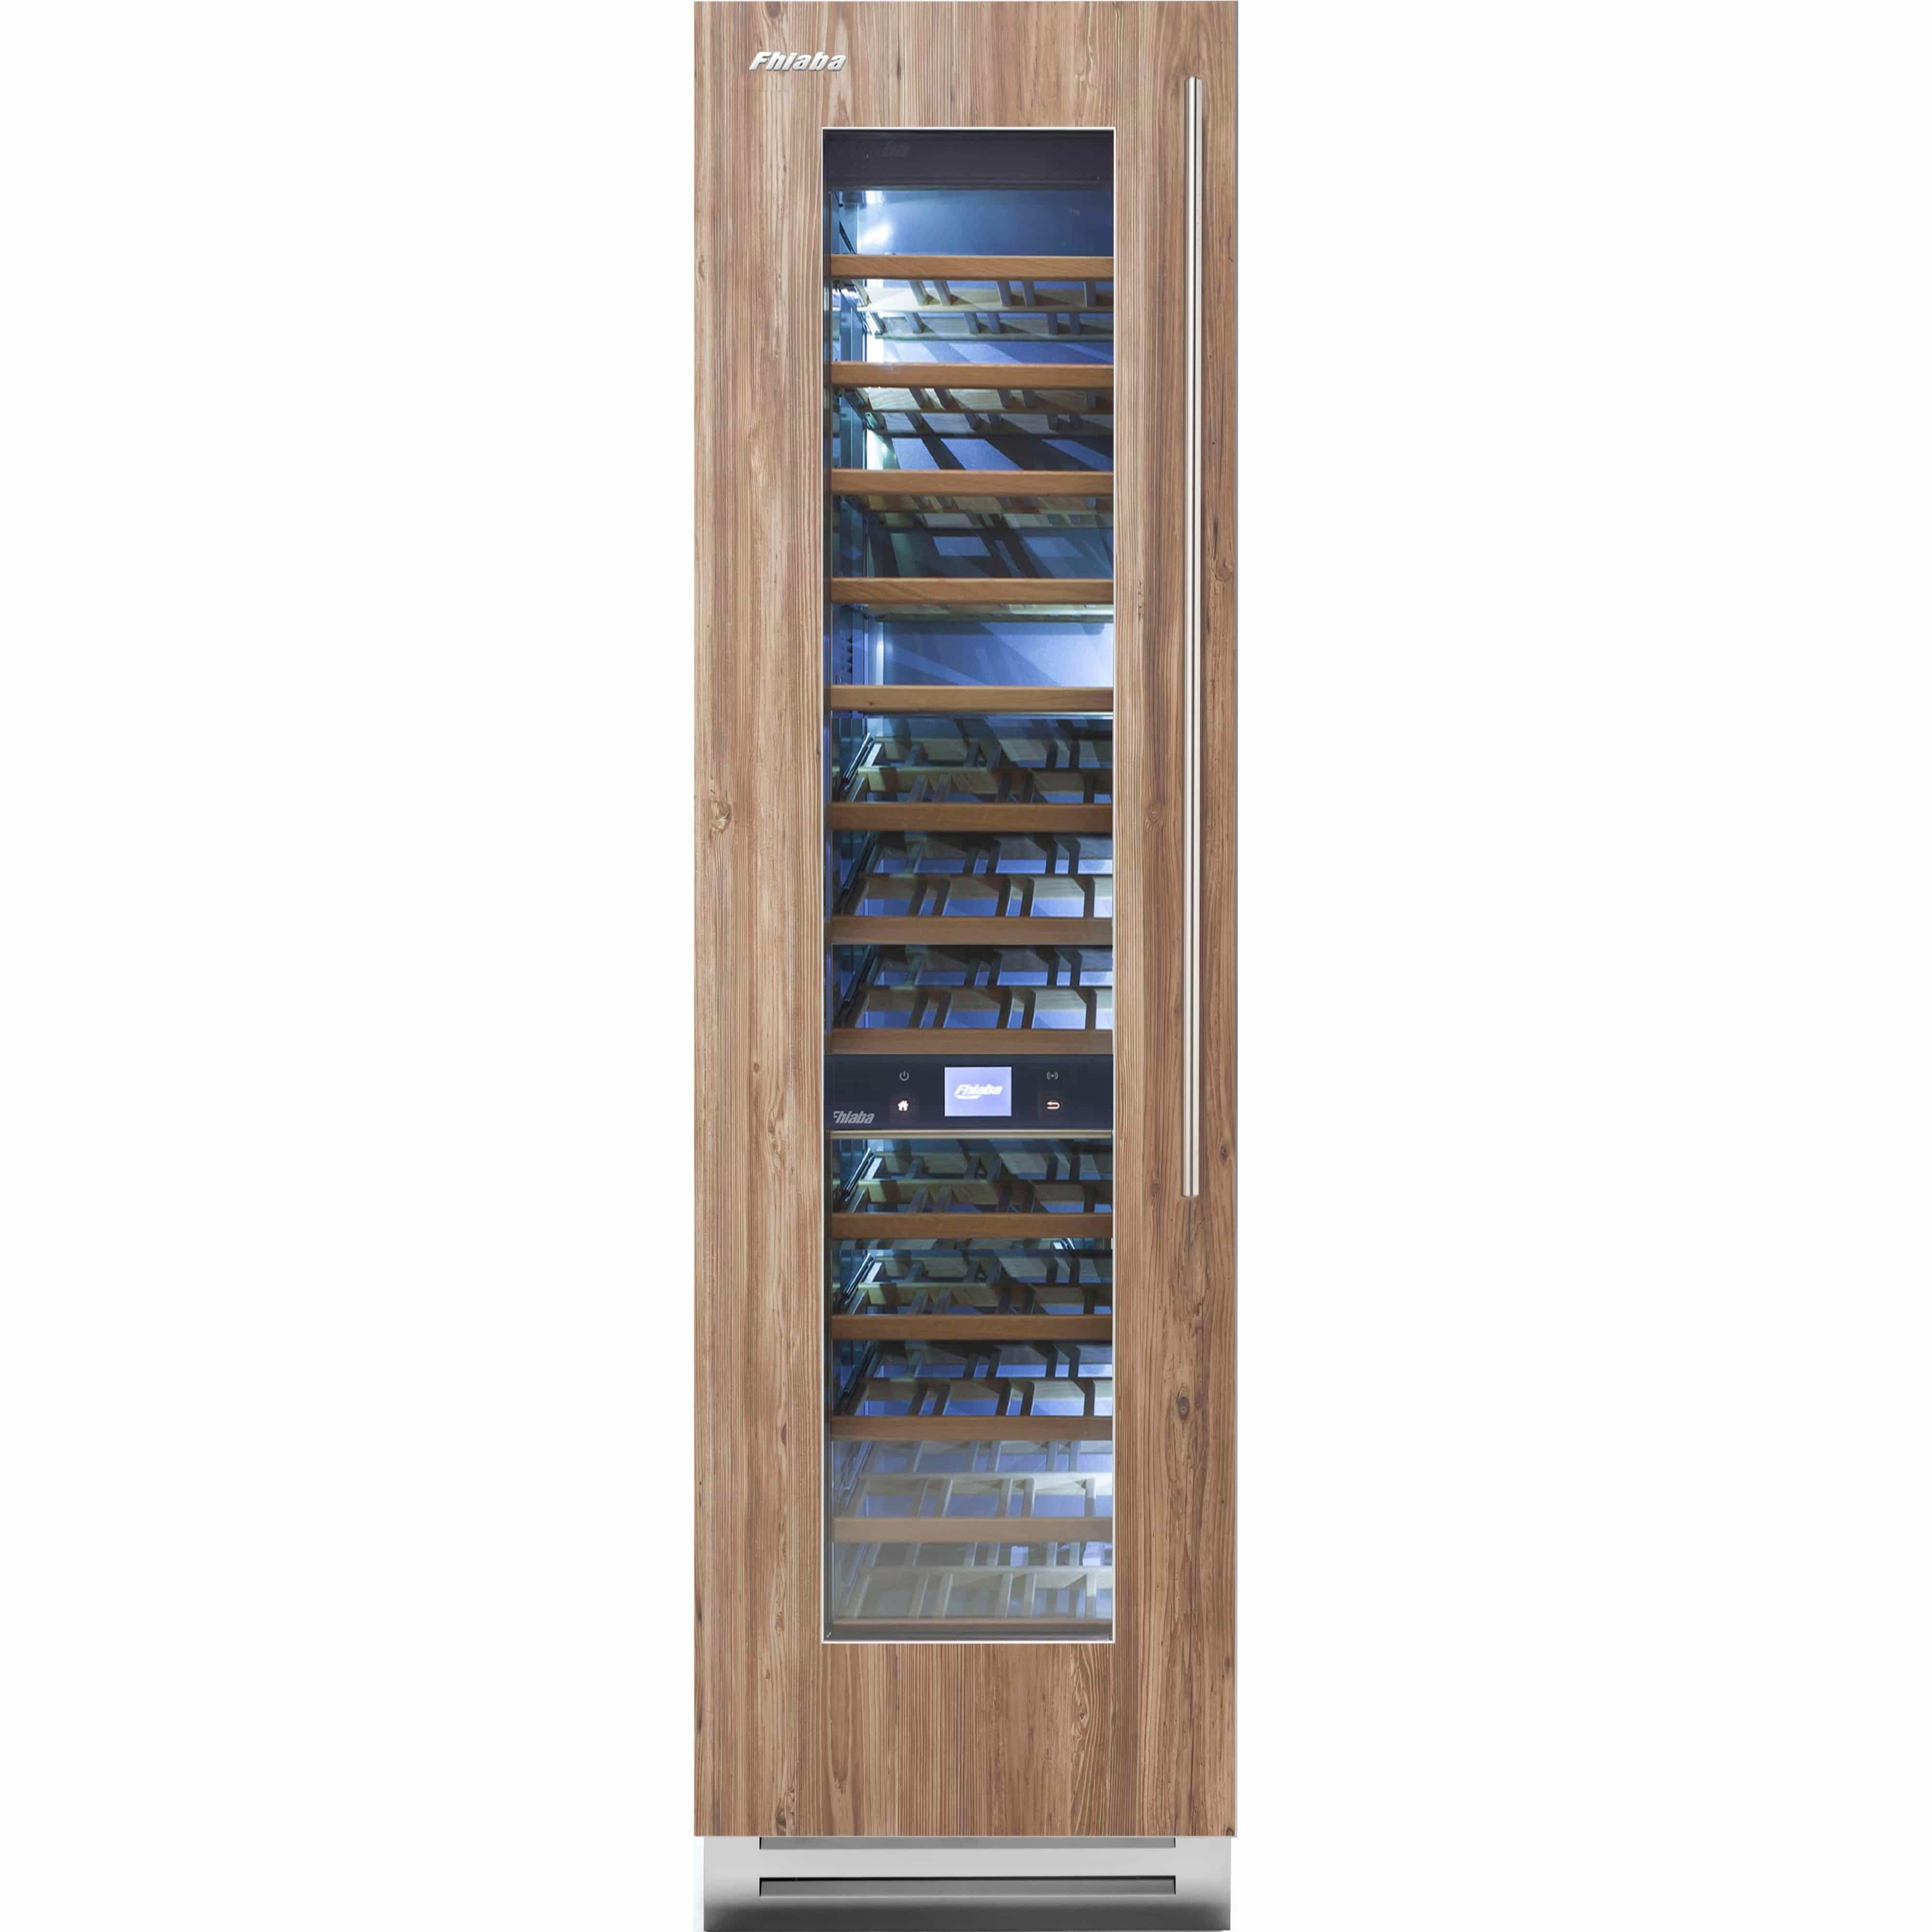 Fhiaba 78-Bottle Integrated Series Wine Cellar with Smart Touch TFT Display FI24WCC-LO2 Wine Storage FI24WCCLO2 Luxury Appliances Direct